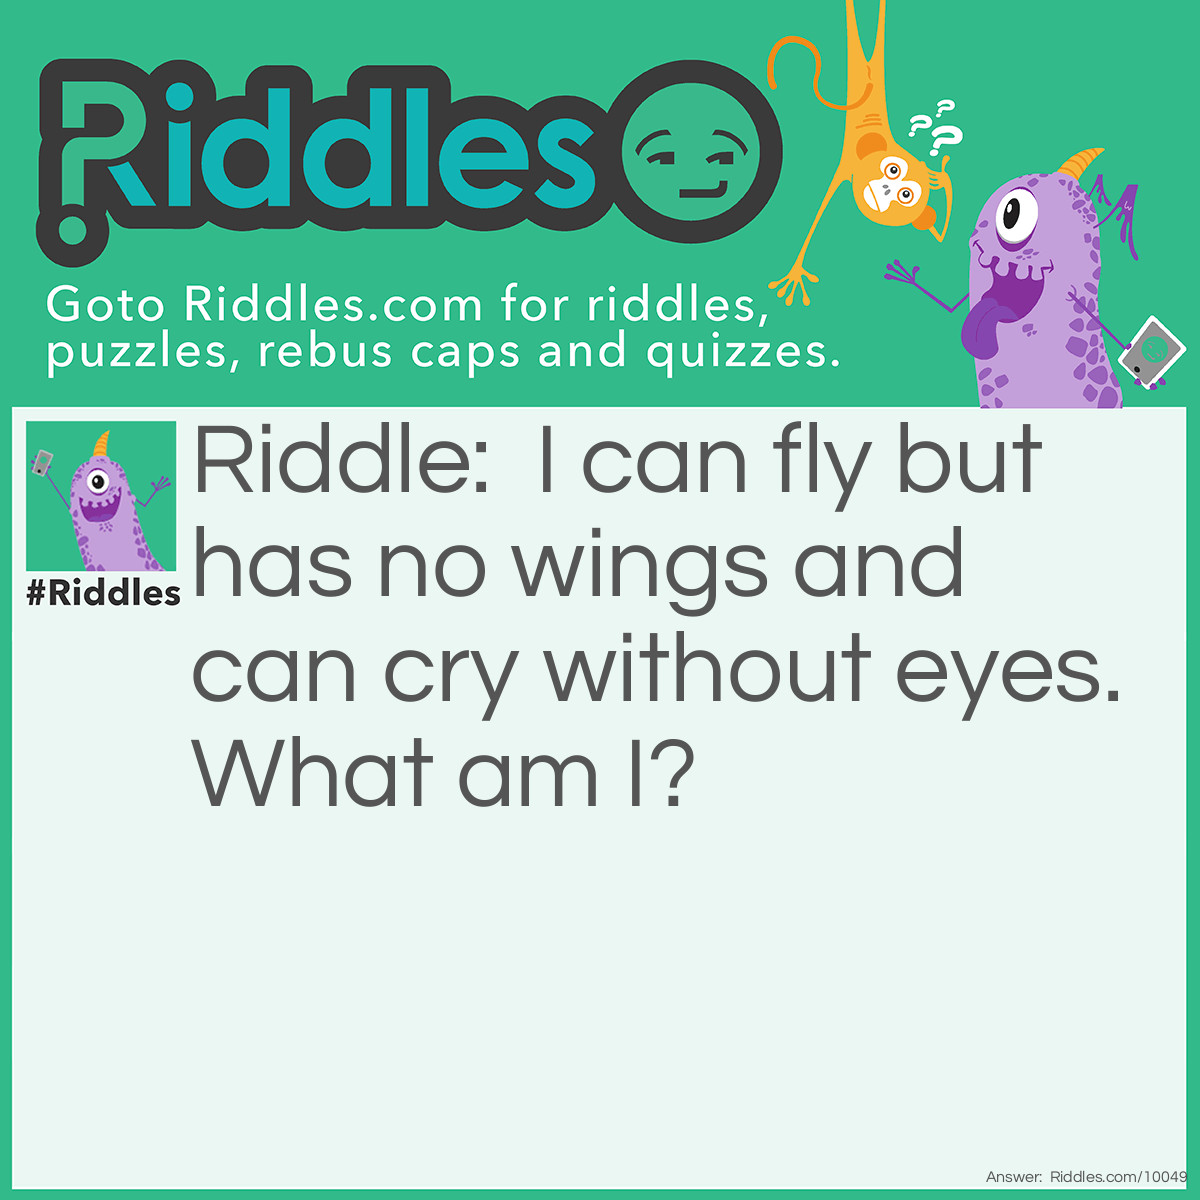 Riddle: I can fly but has no wings and can cry without eyes. What am I? Answer: Cloud.